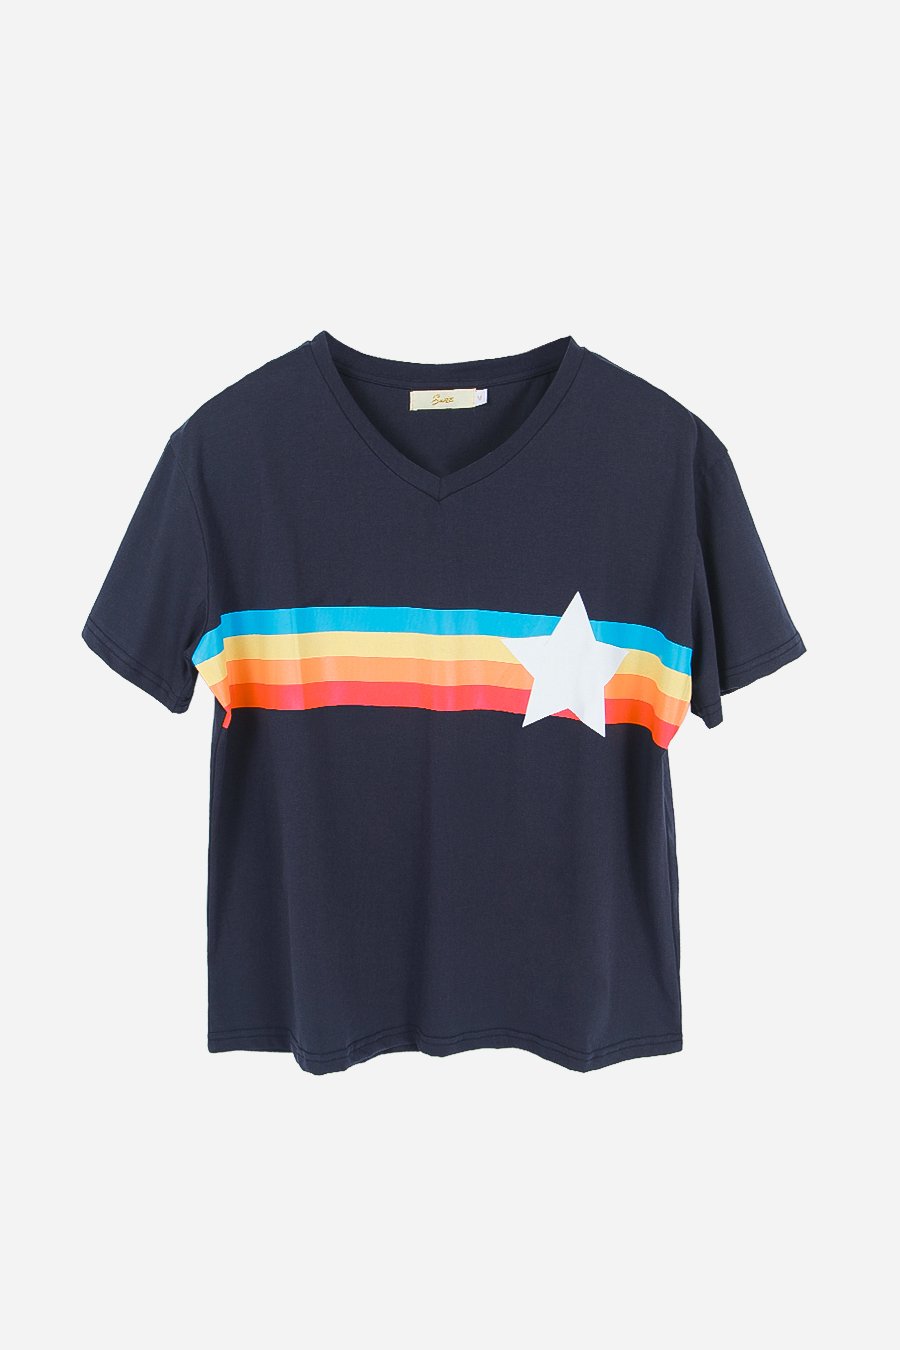 navy t shirt with rainbow stripes and star